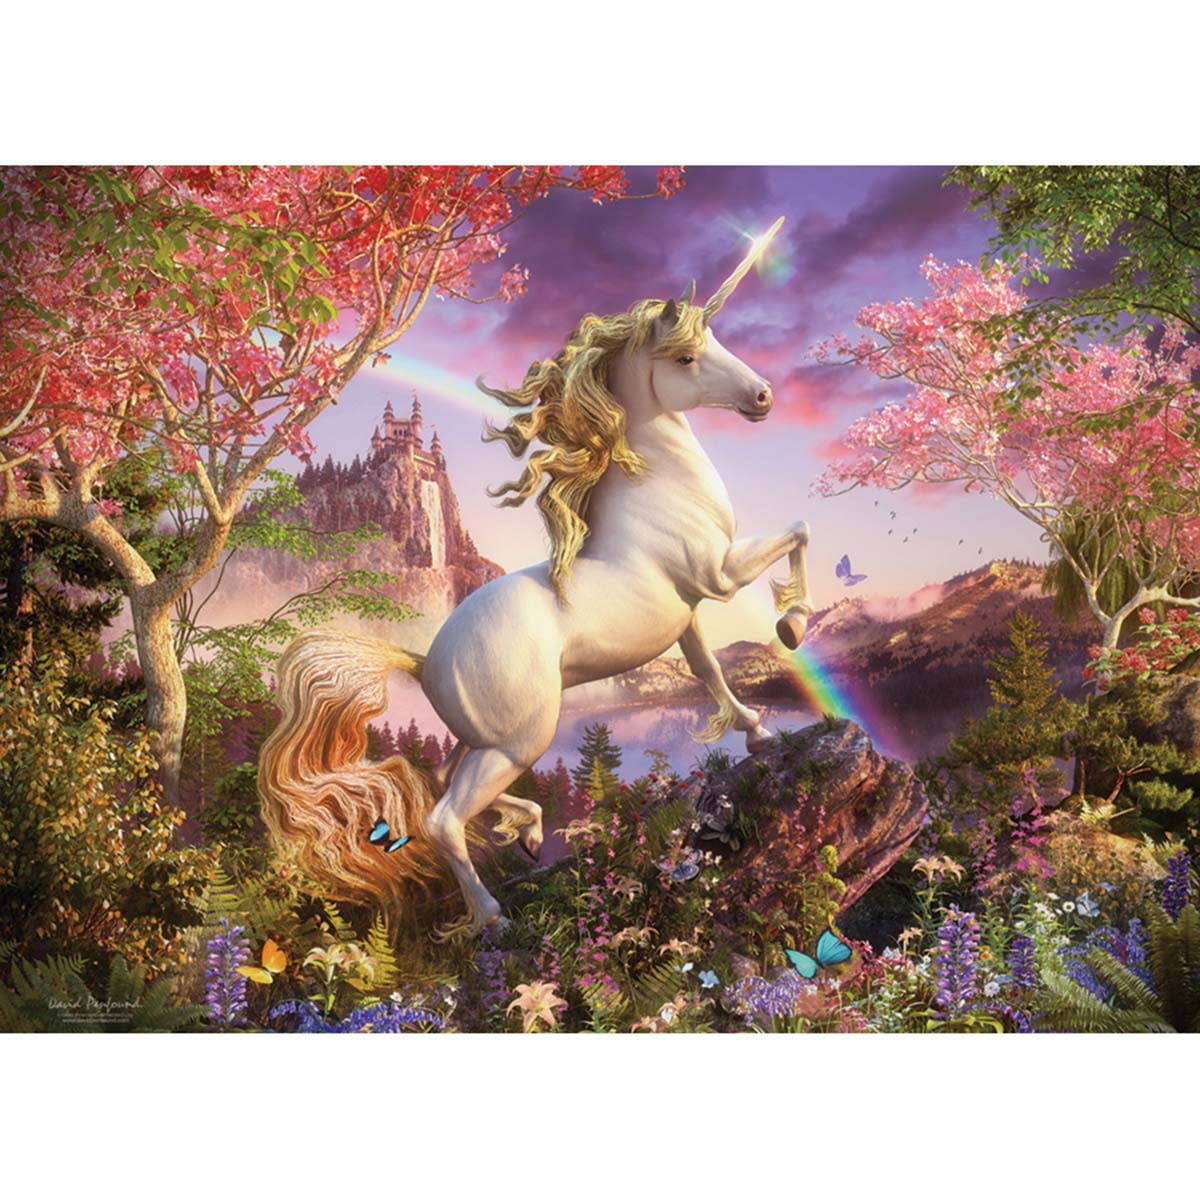 Adult Jigsaw Puzzle-Fantasy Horse-5000 Piece Jigsaw Puzzle Game for Preschool Children Learning Educational Family